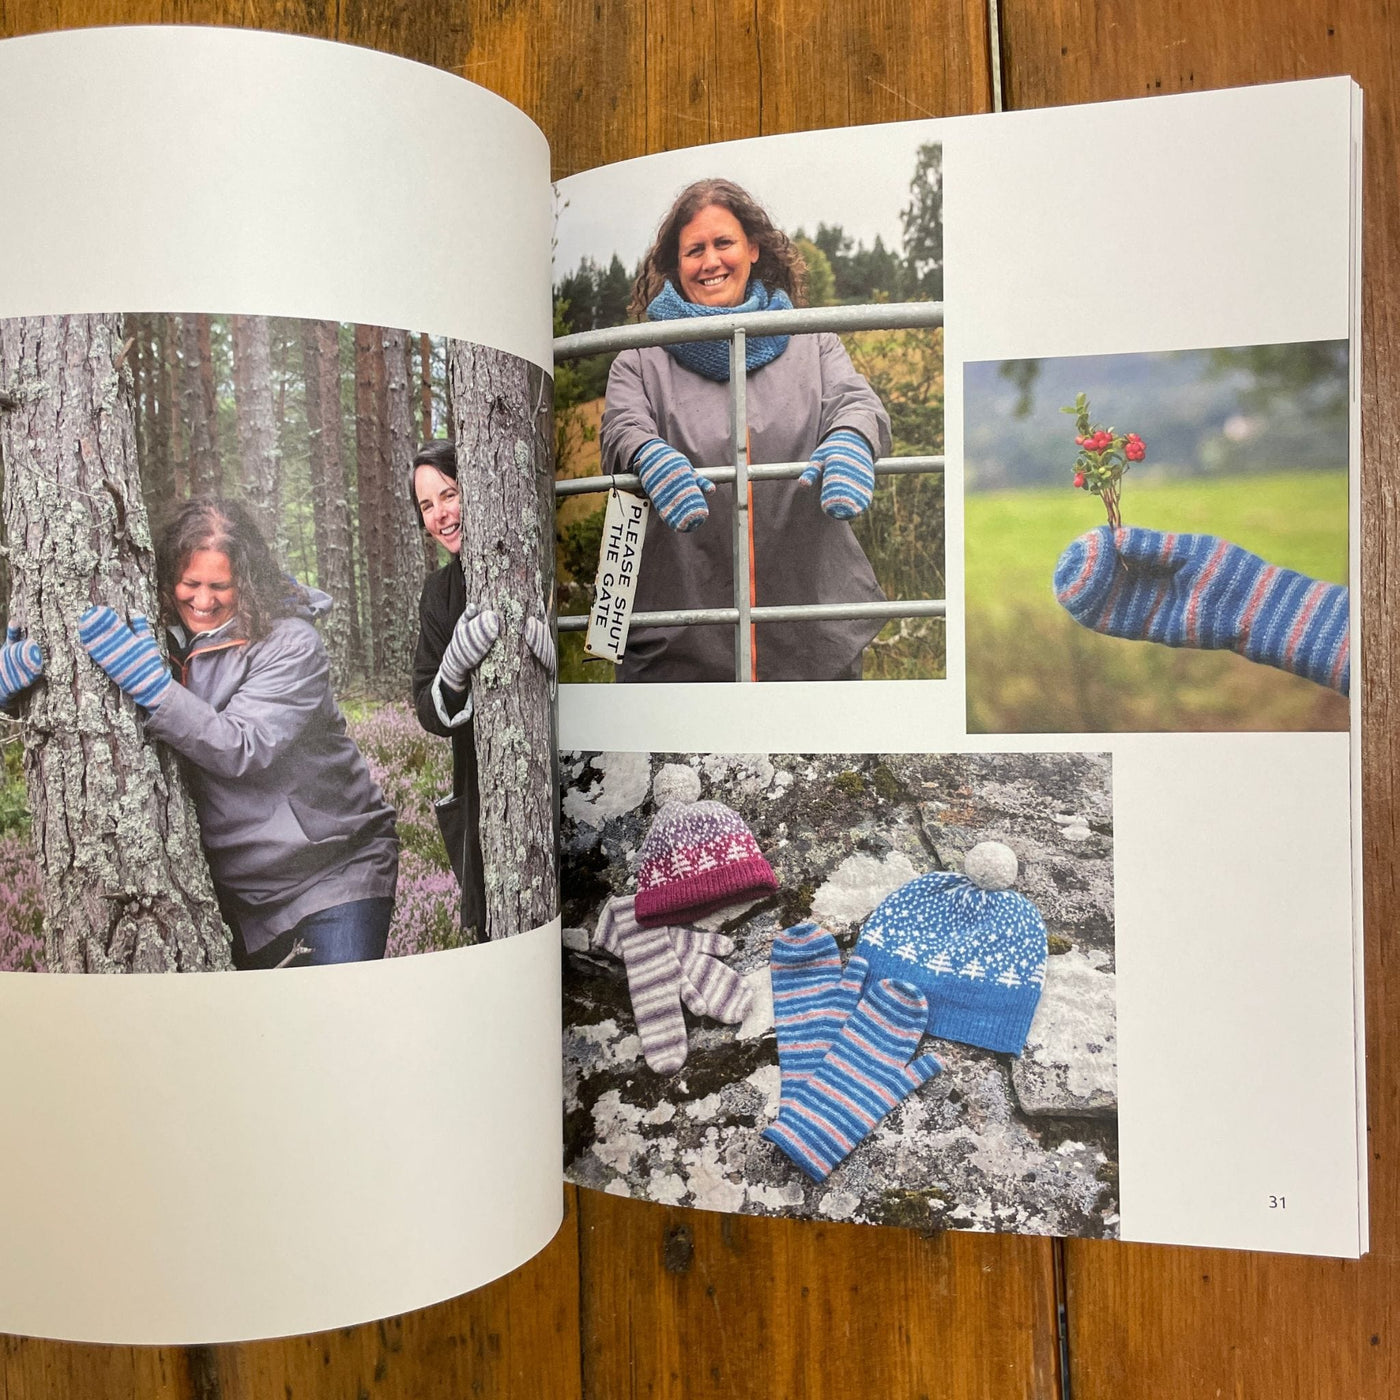 Perspectives book edited by Julie Rutter & Emily K. Williams. Pages open to 4 photos showcasing the Blavattan Mitts and the Inshriach hat - both patterns included in the book. 